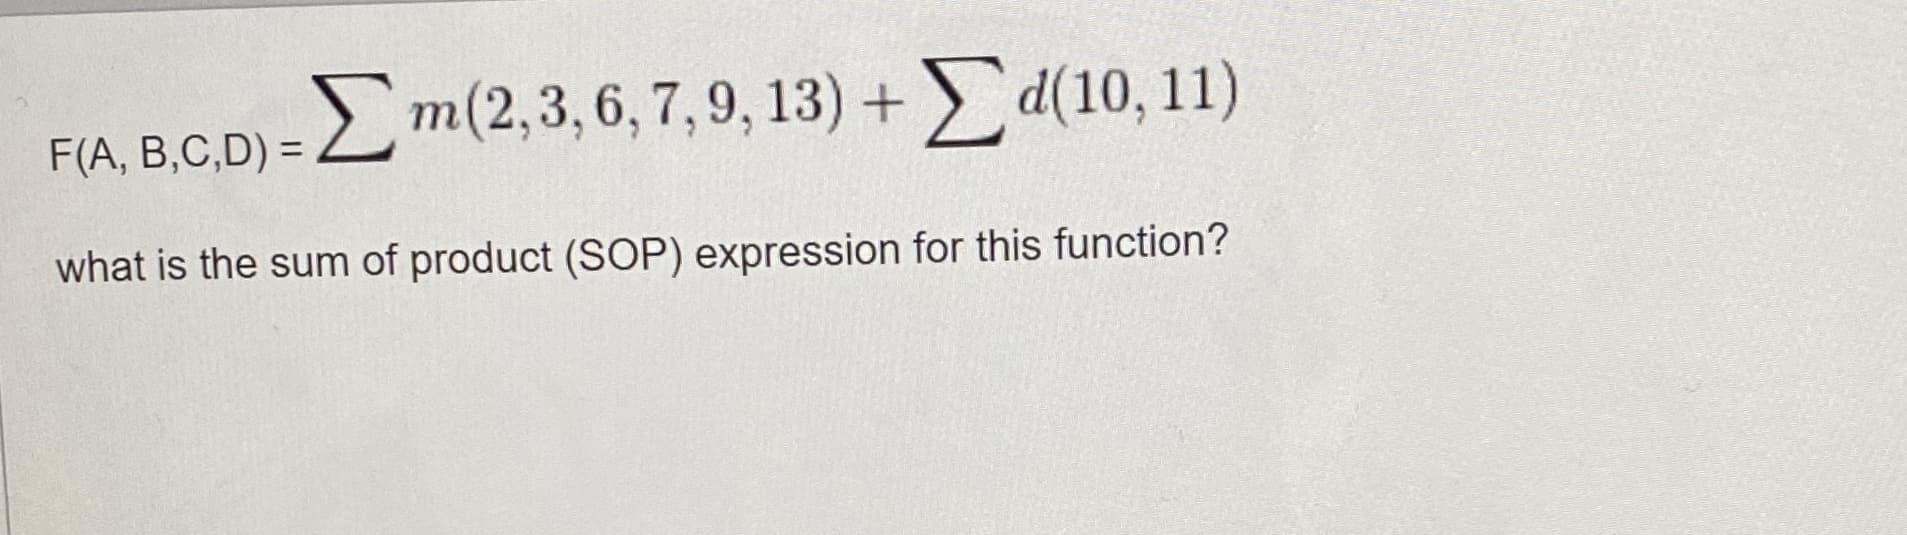 F(A, B,C,D) = Lm(2,3, 6, 7, 9, 13) + > d(10, 11)
what is the sum of product (SOP) expression for this function?
